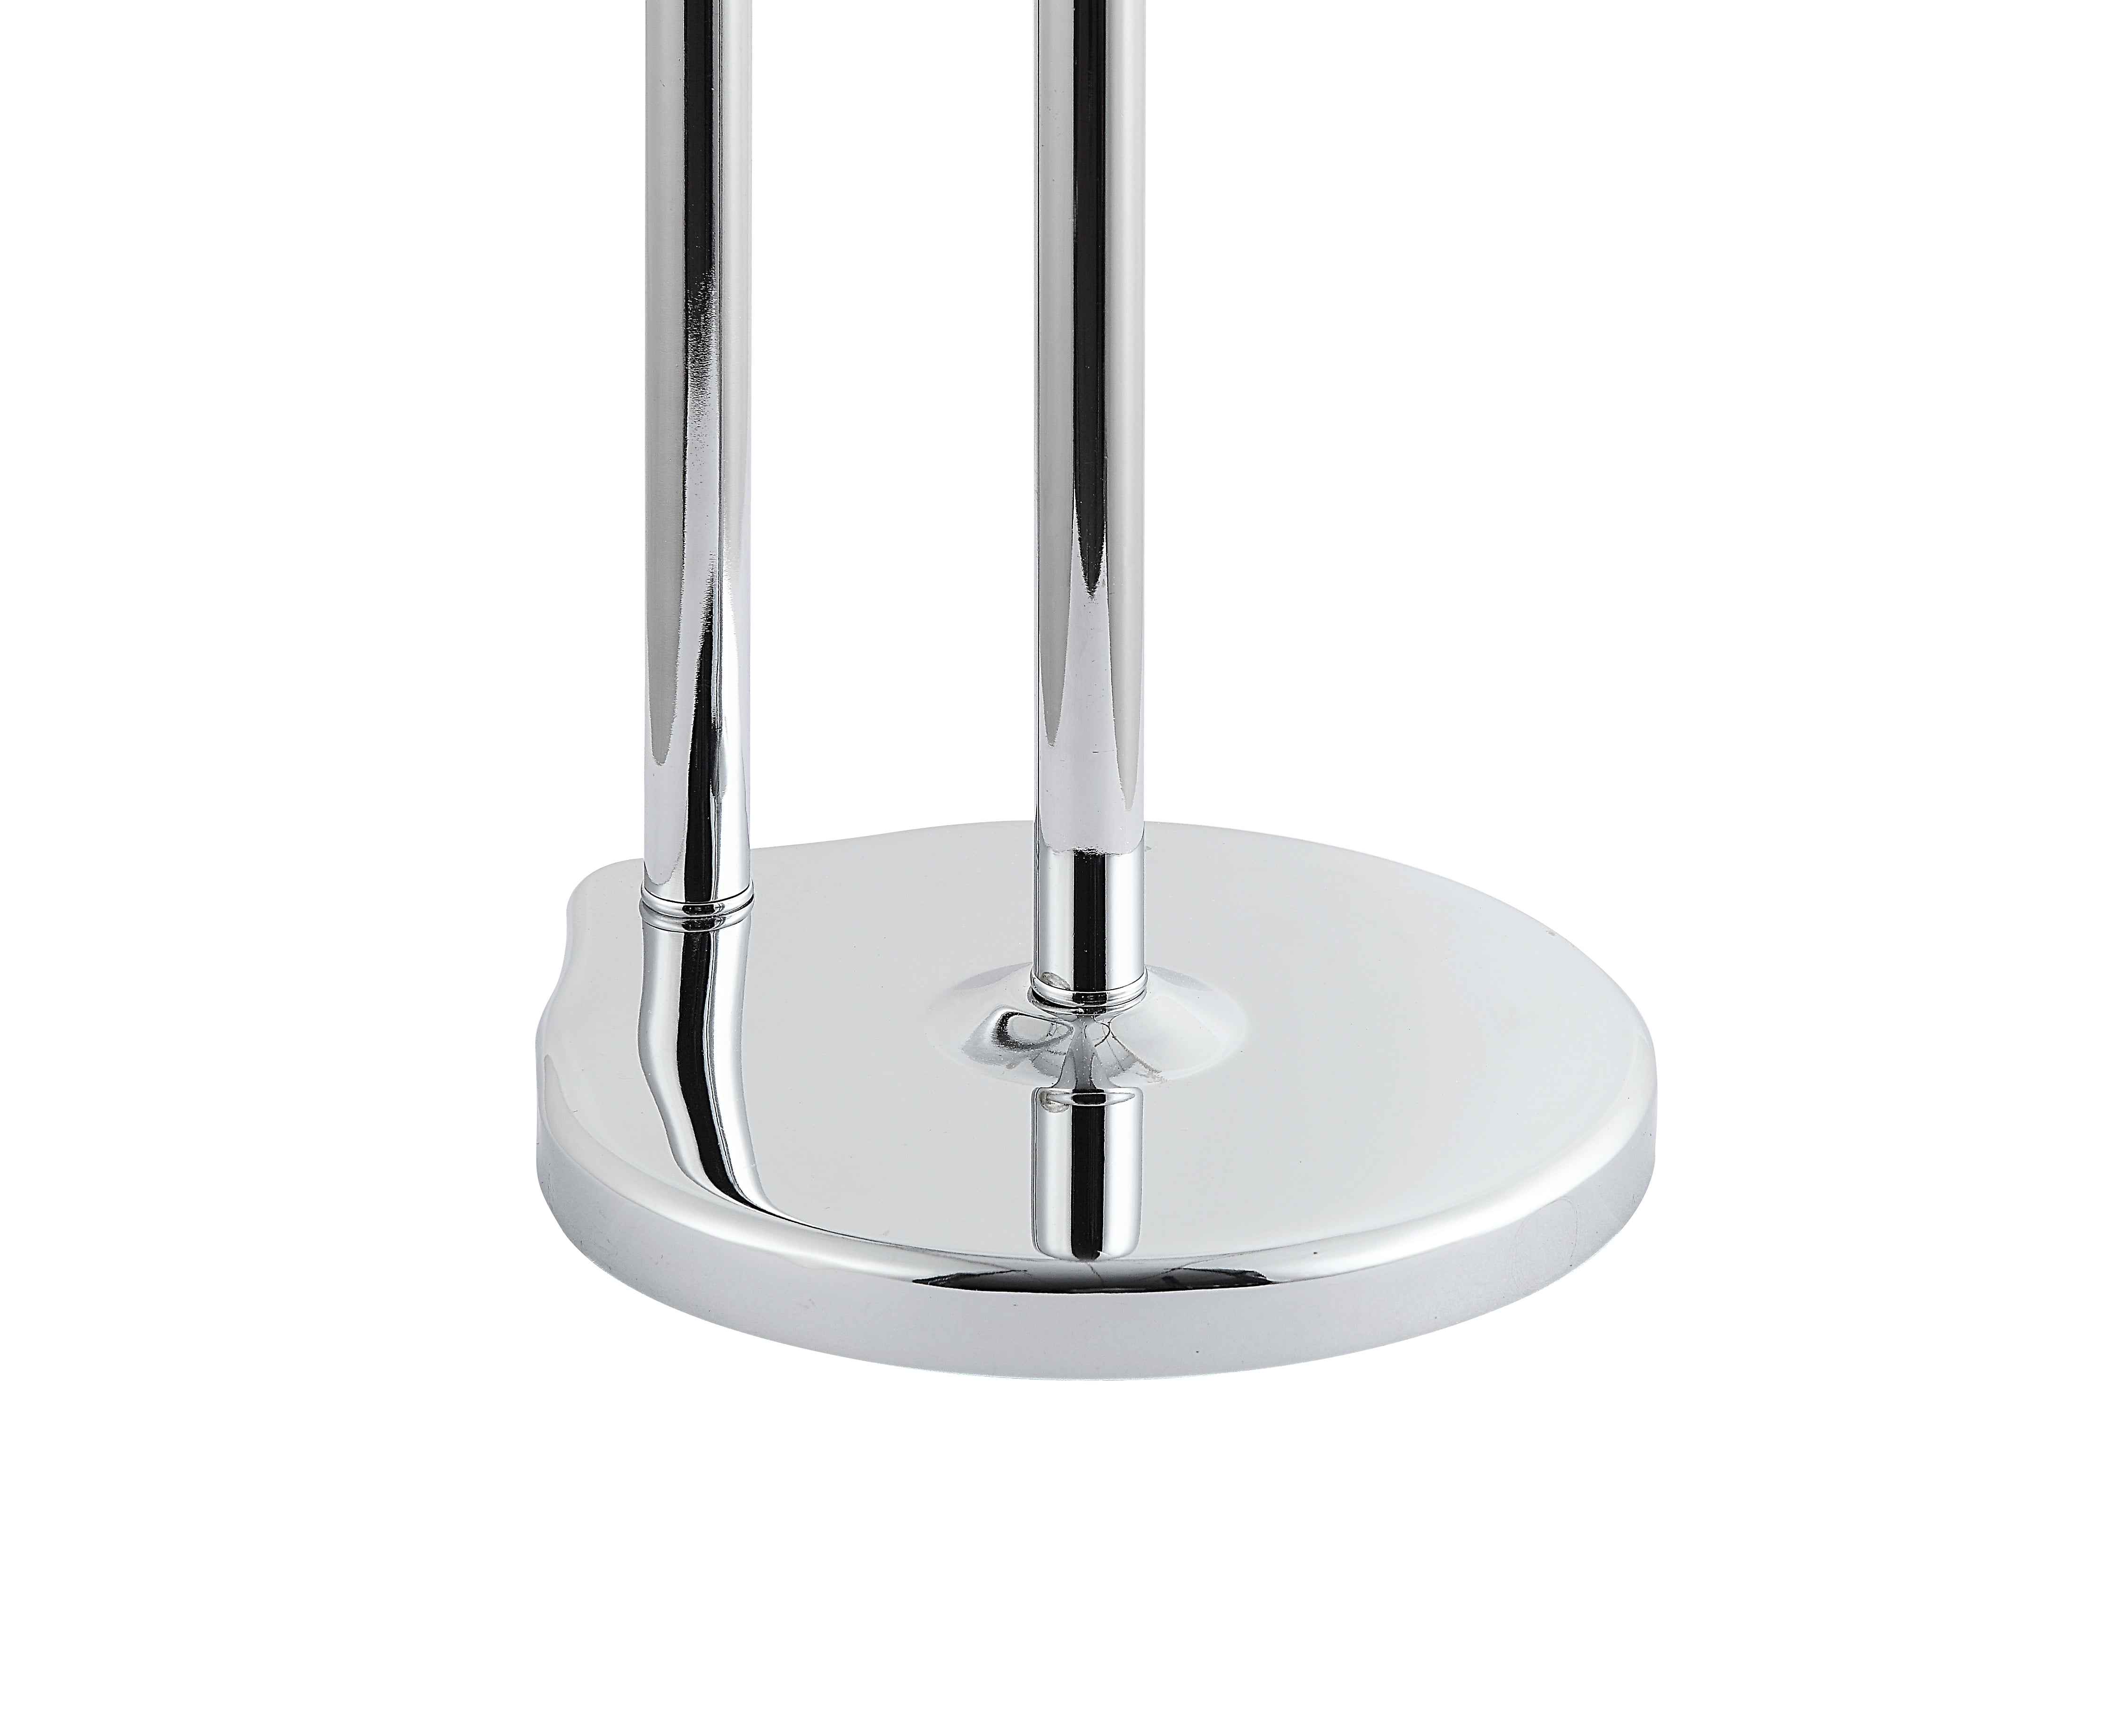 DW 10, Freestanding Reserve Toilet Paper Holder in Polished Chrome